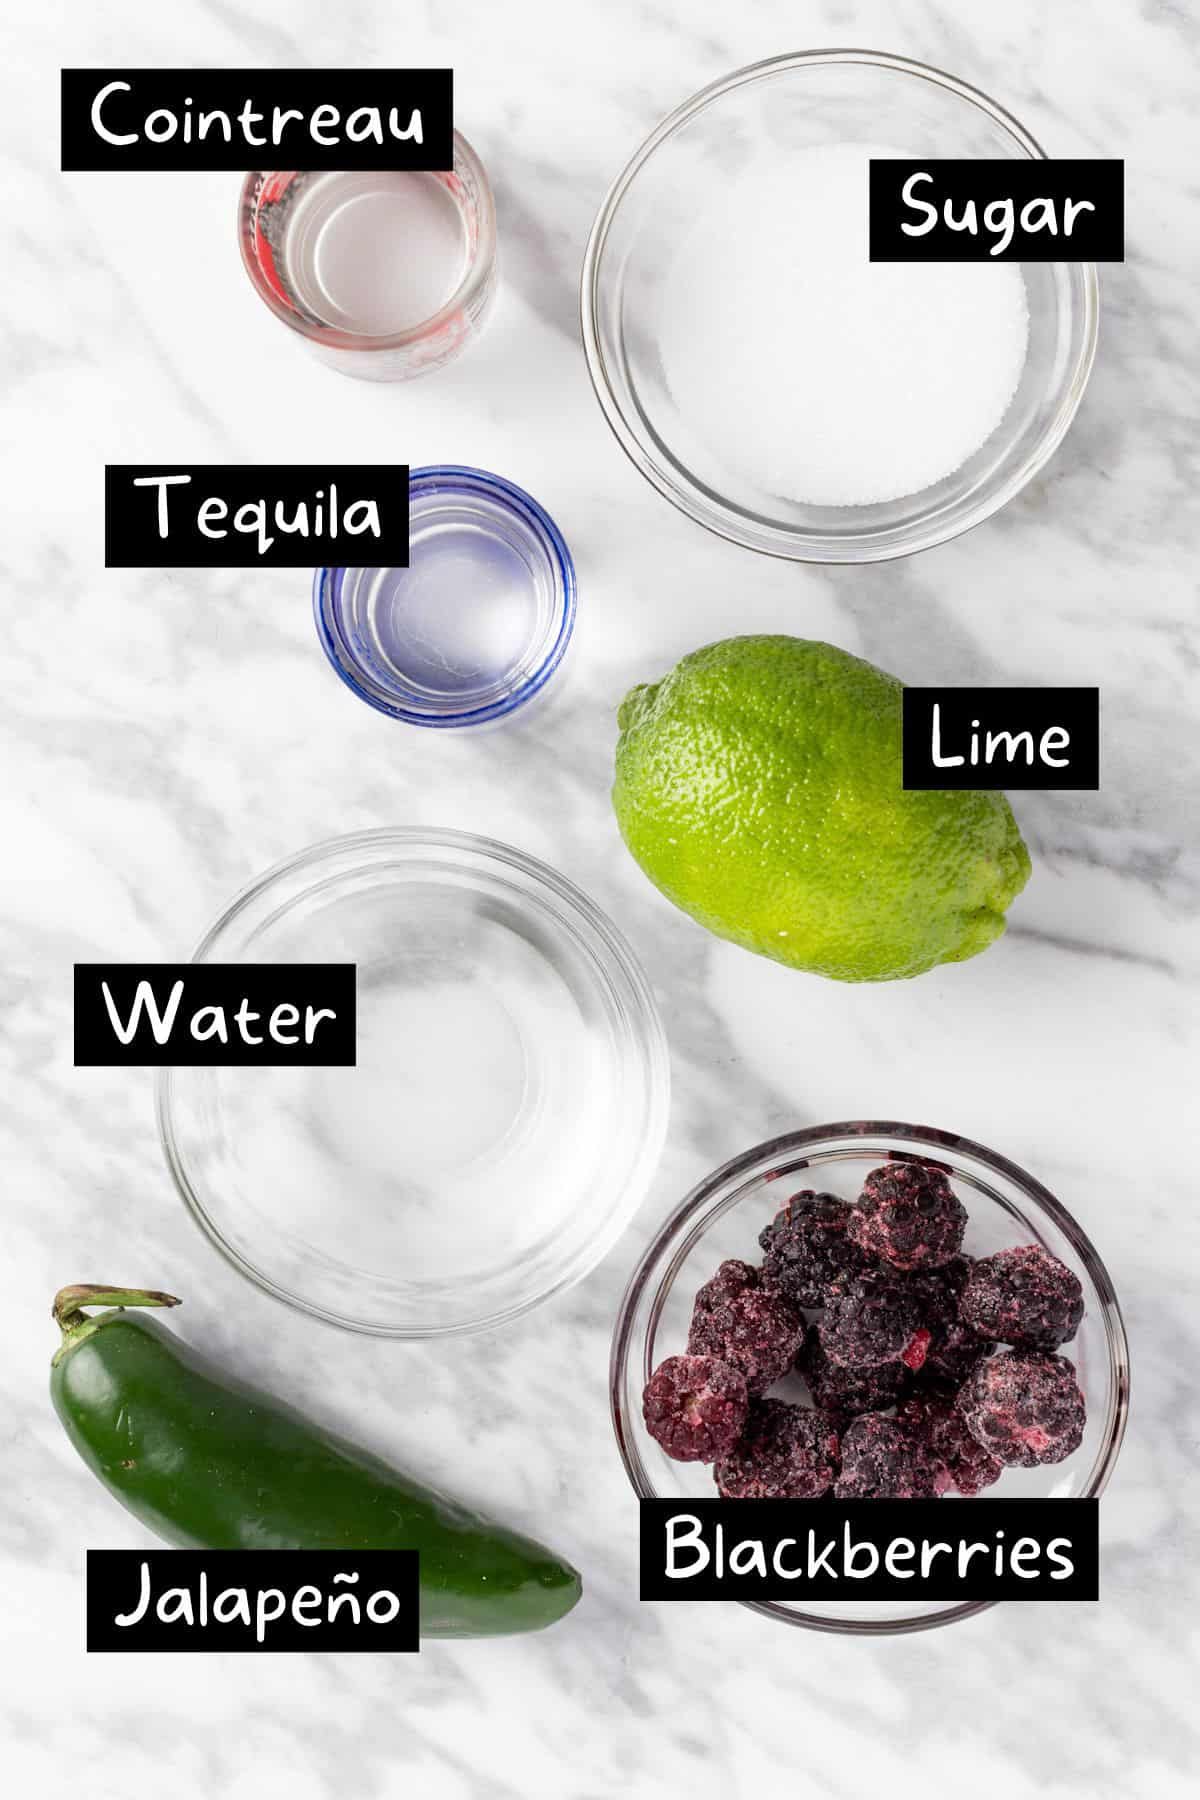 The ingredients needed to make the margarita.